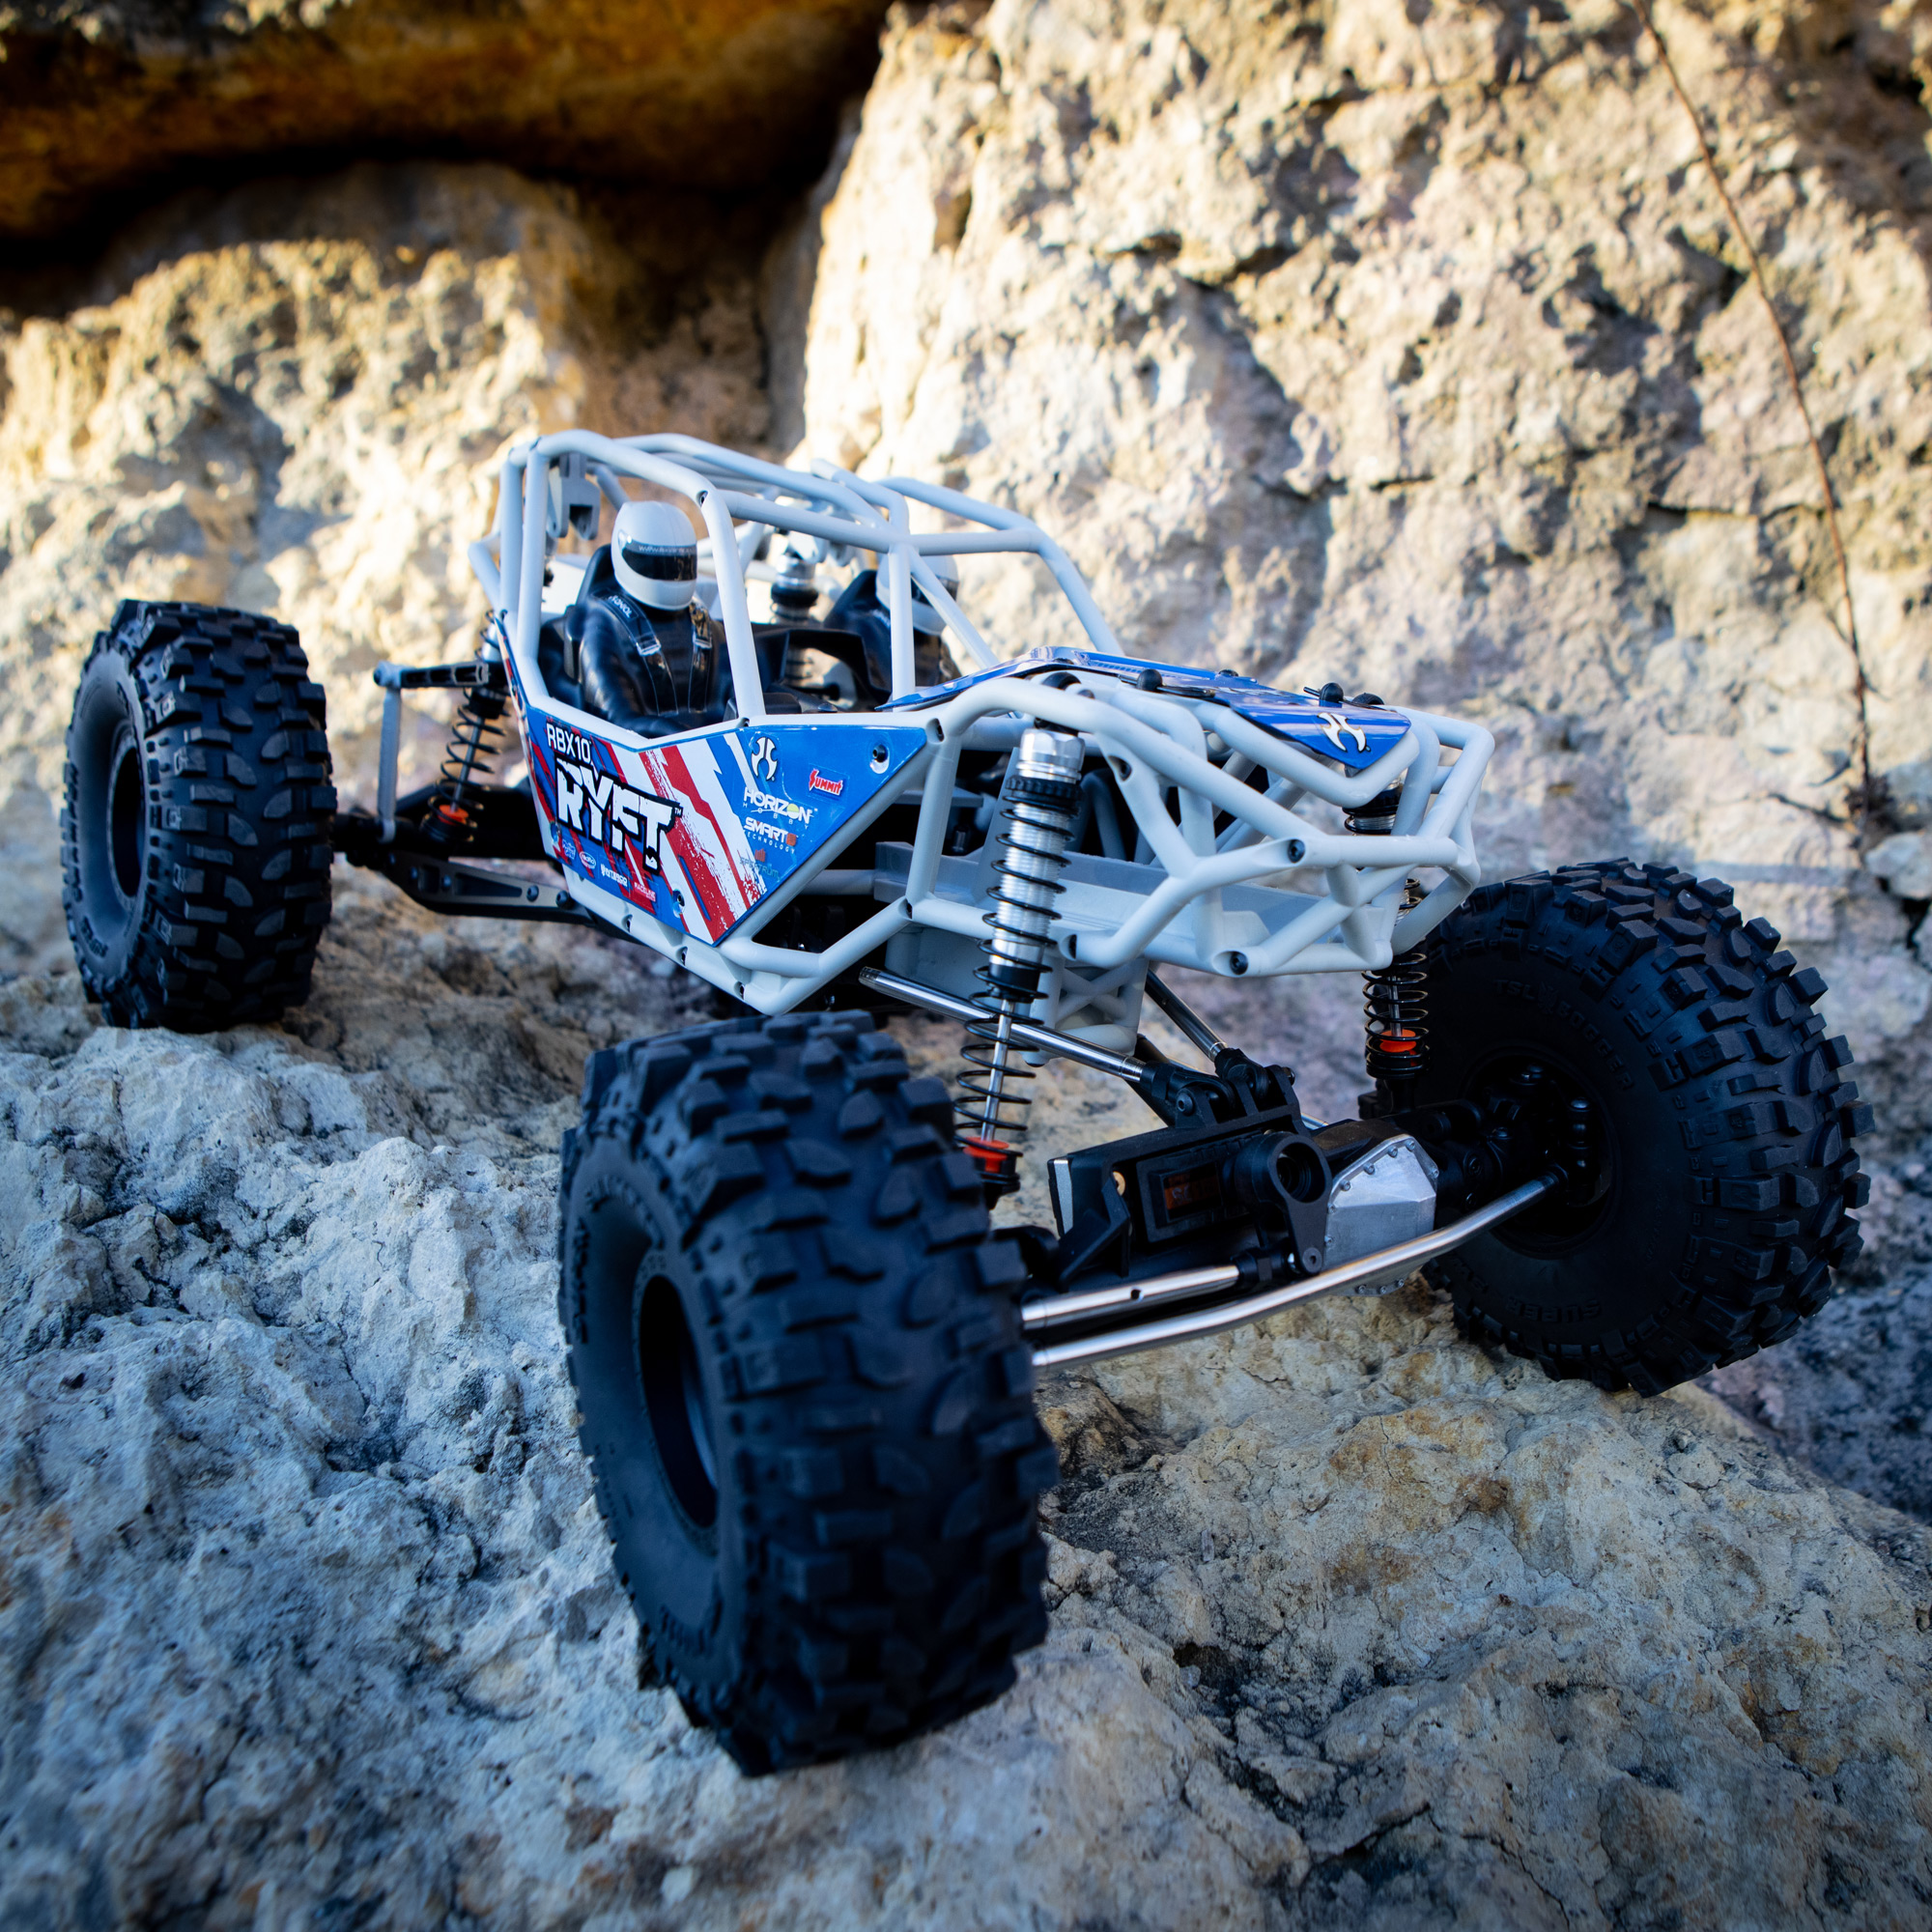 Axial RC Truck 1/10 RBX10 Ryft 4 Wheel Drive Rock Bouncer Kit Gray AXI03009 Trucks Elec Kit 1/10 Off-Road - image 5 of 11